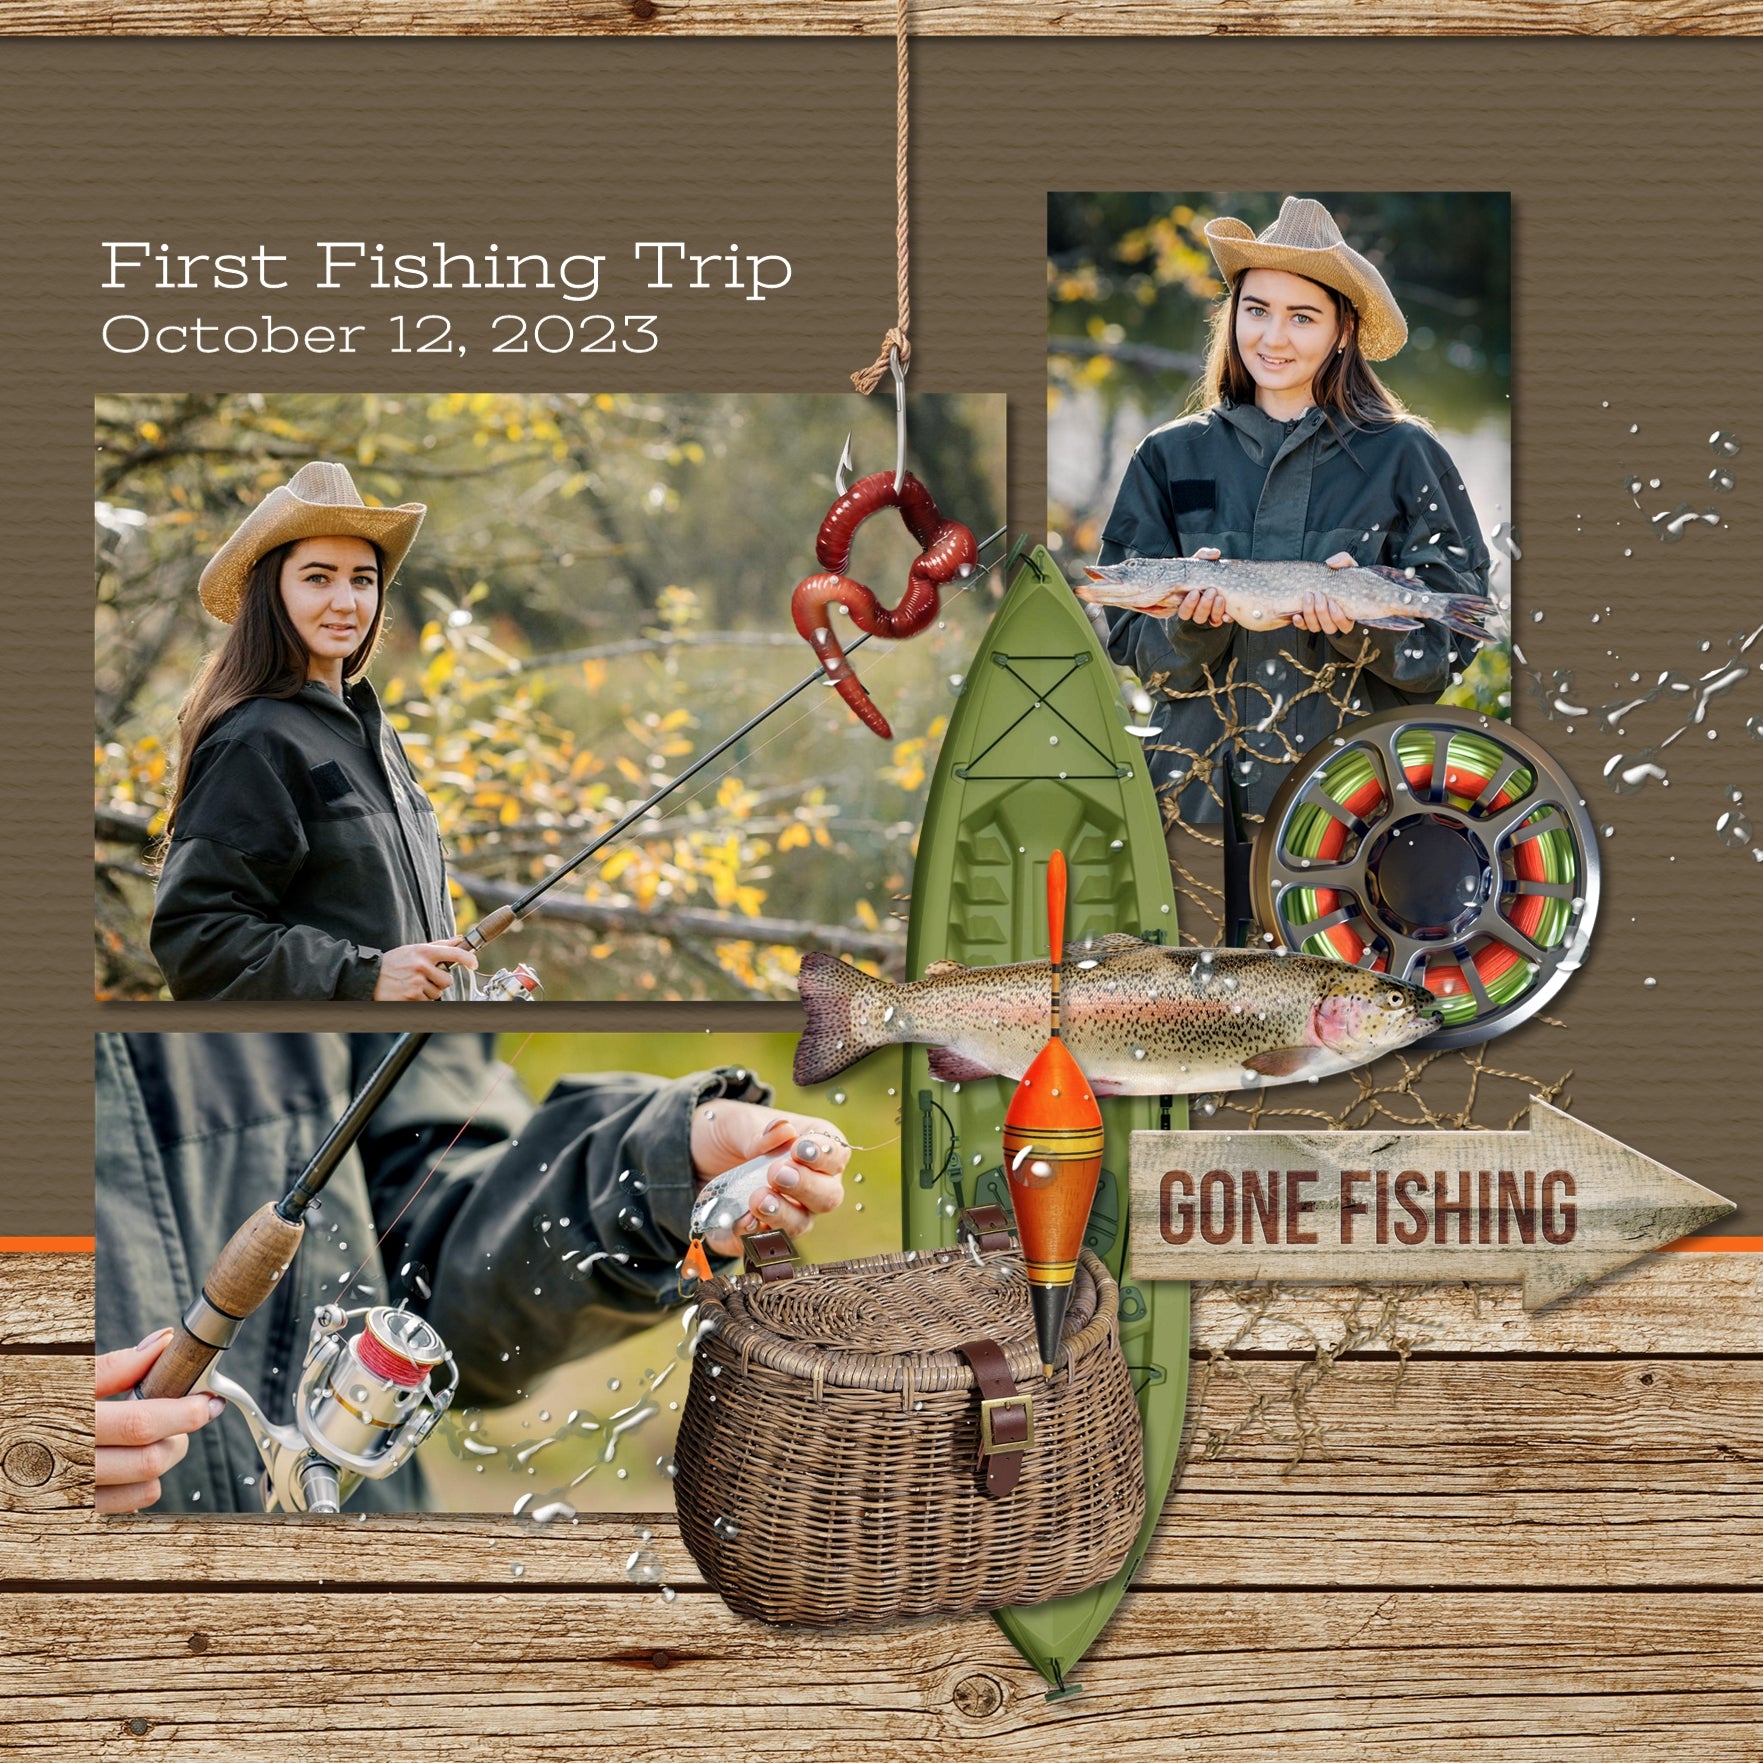 Designed with the avid sportsman or fisherman in mind, this digital art embellishment collection by Lucky Girl Creative includes a variety of fishing elements. Not only is this kit great for fishing pages but it will also be a nice addition to camping, hunting, and outdoor nature adventures such as hikes around the lake, river, or ocean - for both family and for the man in your life.